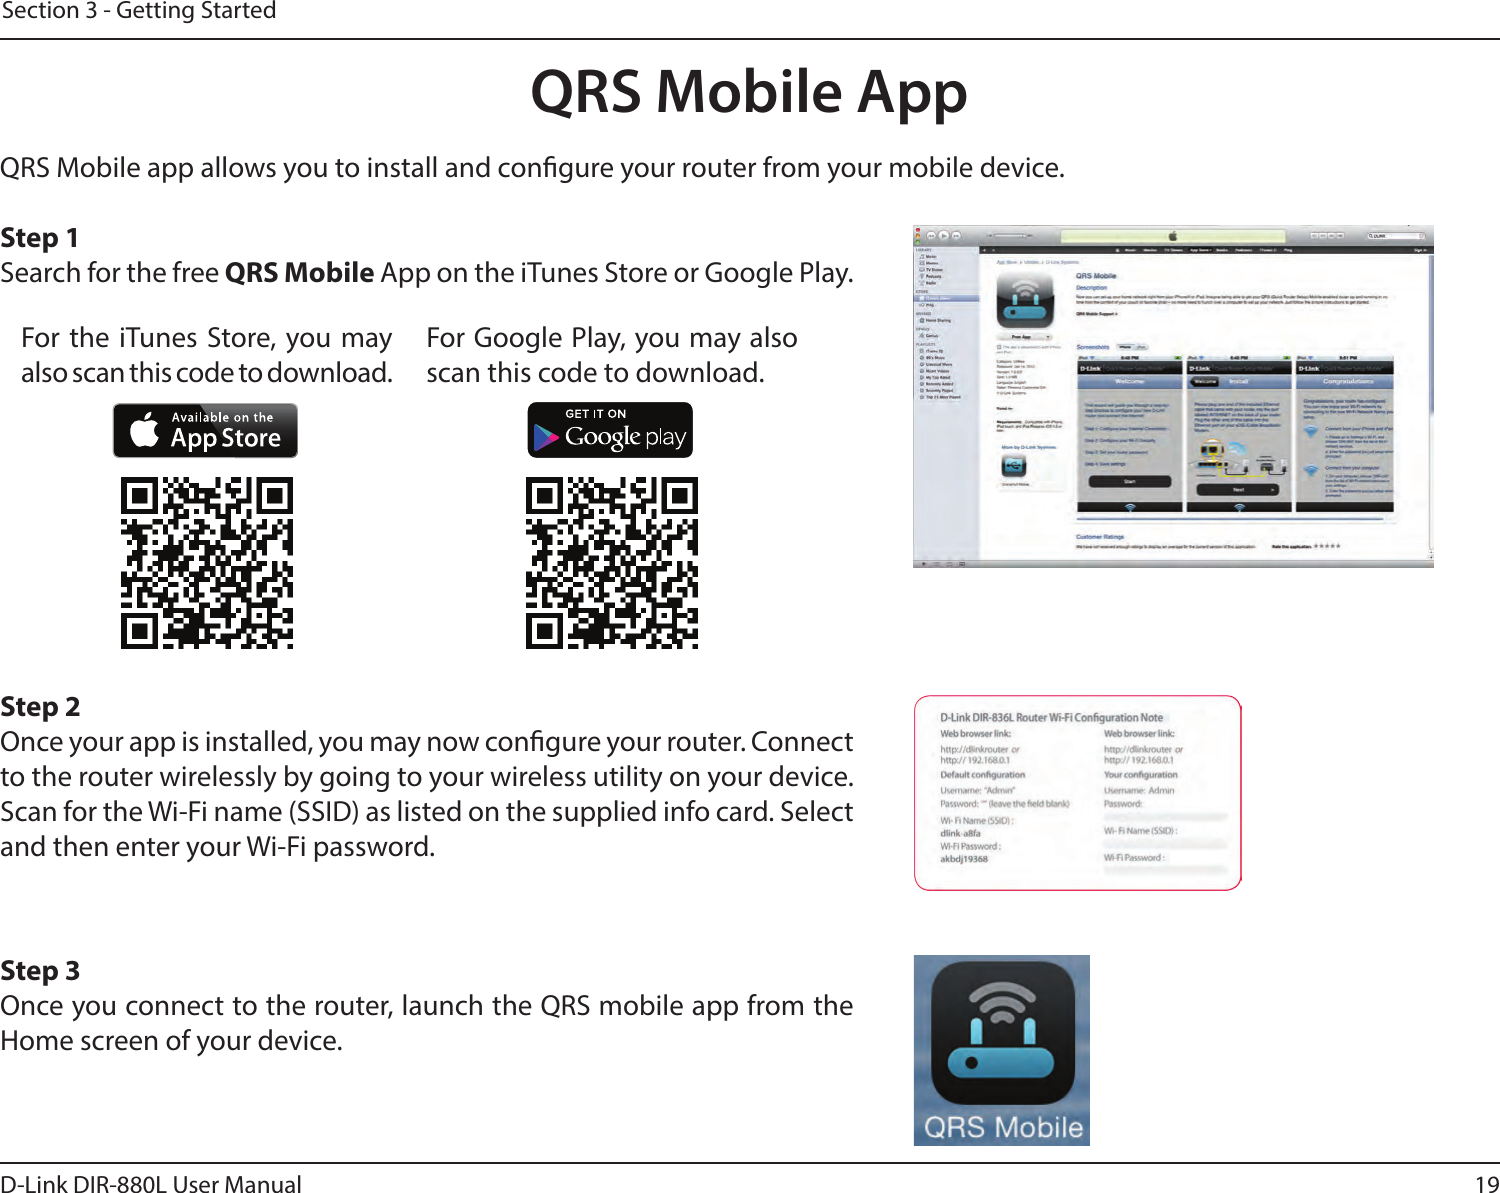 19D-Link DIR-880L User ManualSection 3 - Getting StartedQRS Mobile AppQRS Mobile app allows you to install and congure your router from your mobile device. Step 1Search for the free QRS Mobile App on the iTunes Store or Google Play.Step 2Once your app is installed, you may now congure your router. Connect to the router wirelessly by going to your wireless utility on your device. Scan for the Wi-Fi name (SSID) as listed on the supplied info card. Select and then enter your Wi-Fi password.Step 3Once you connect to the router, launch the QRS mobile app from the Home screen of your device.For the iTunes Store, you may also scan this code to download.For Google Play, you may also scan this code to download.